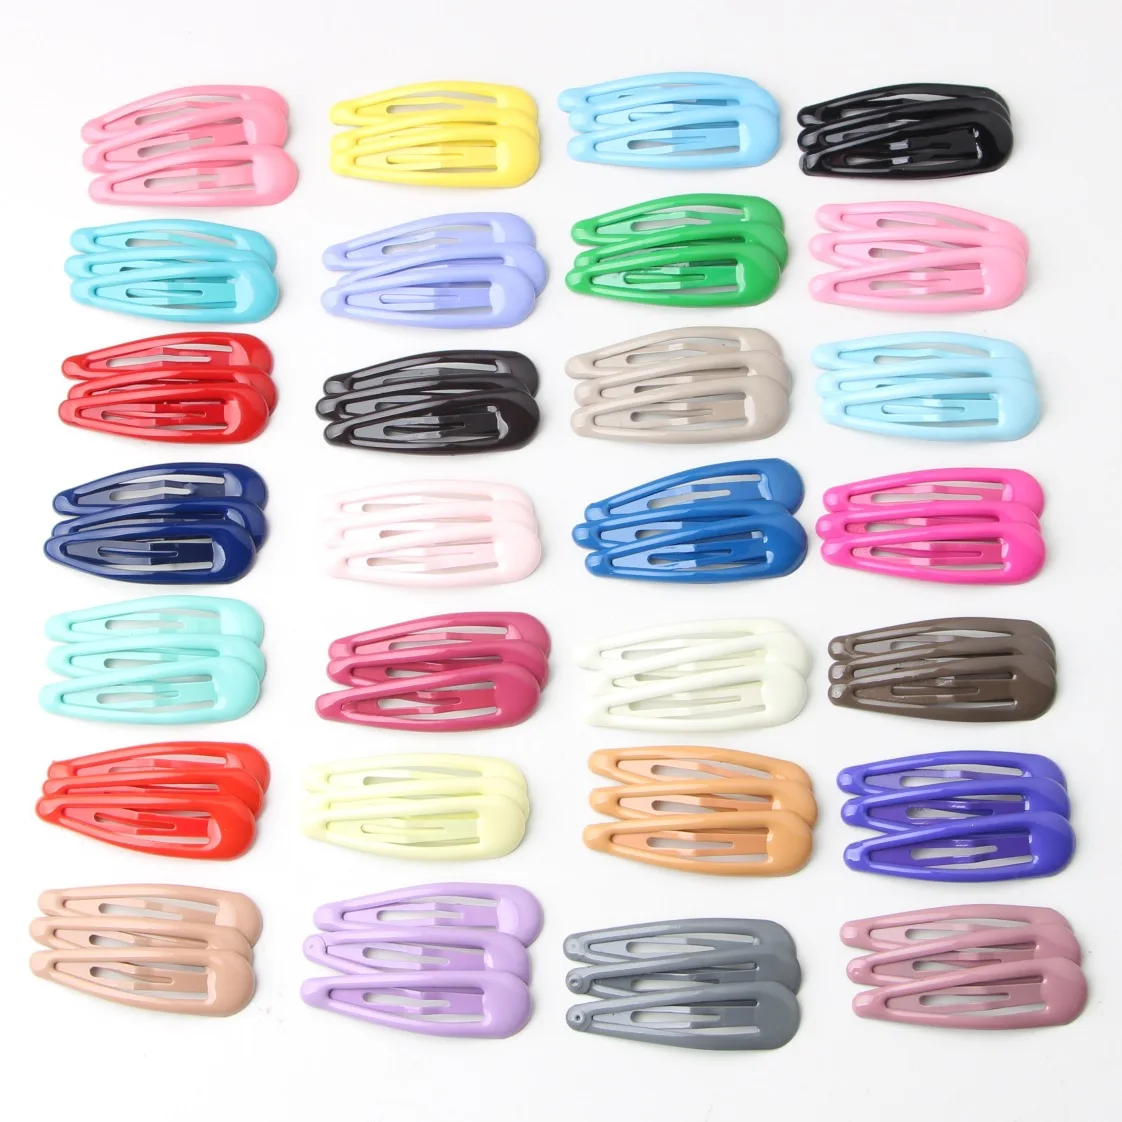 

100pcs/lot Hairpins Hair Clips Pins Hairgrip Candy Colorful Snap Hair Clips Waterdrop Kids Hair Accessories For Women Girls